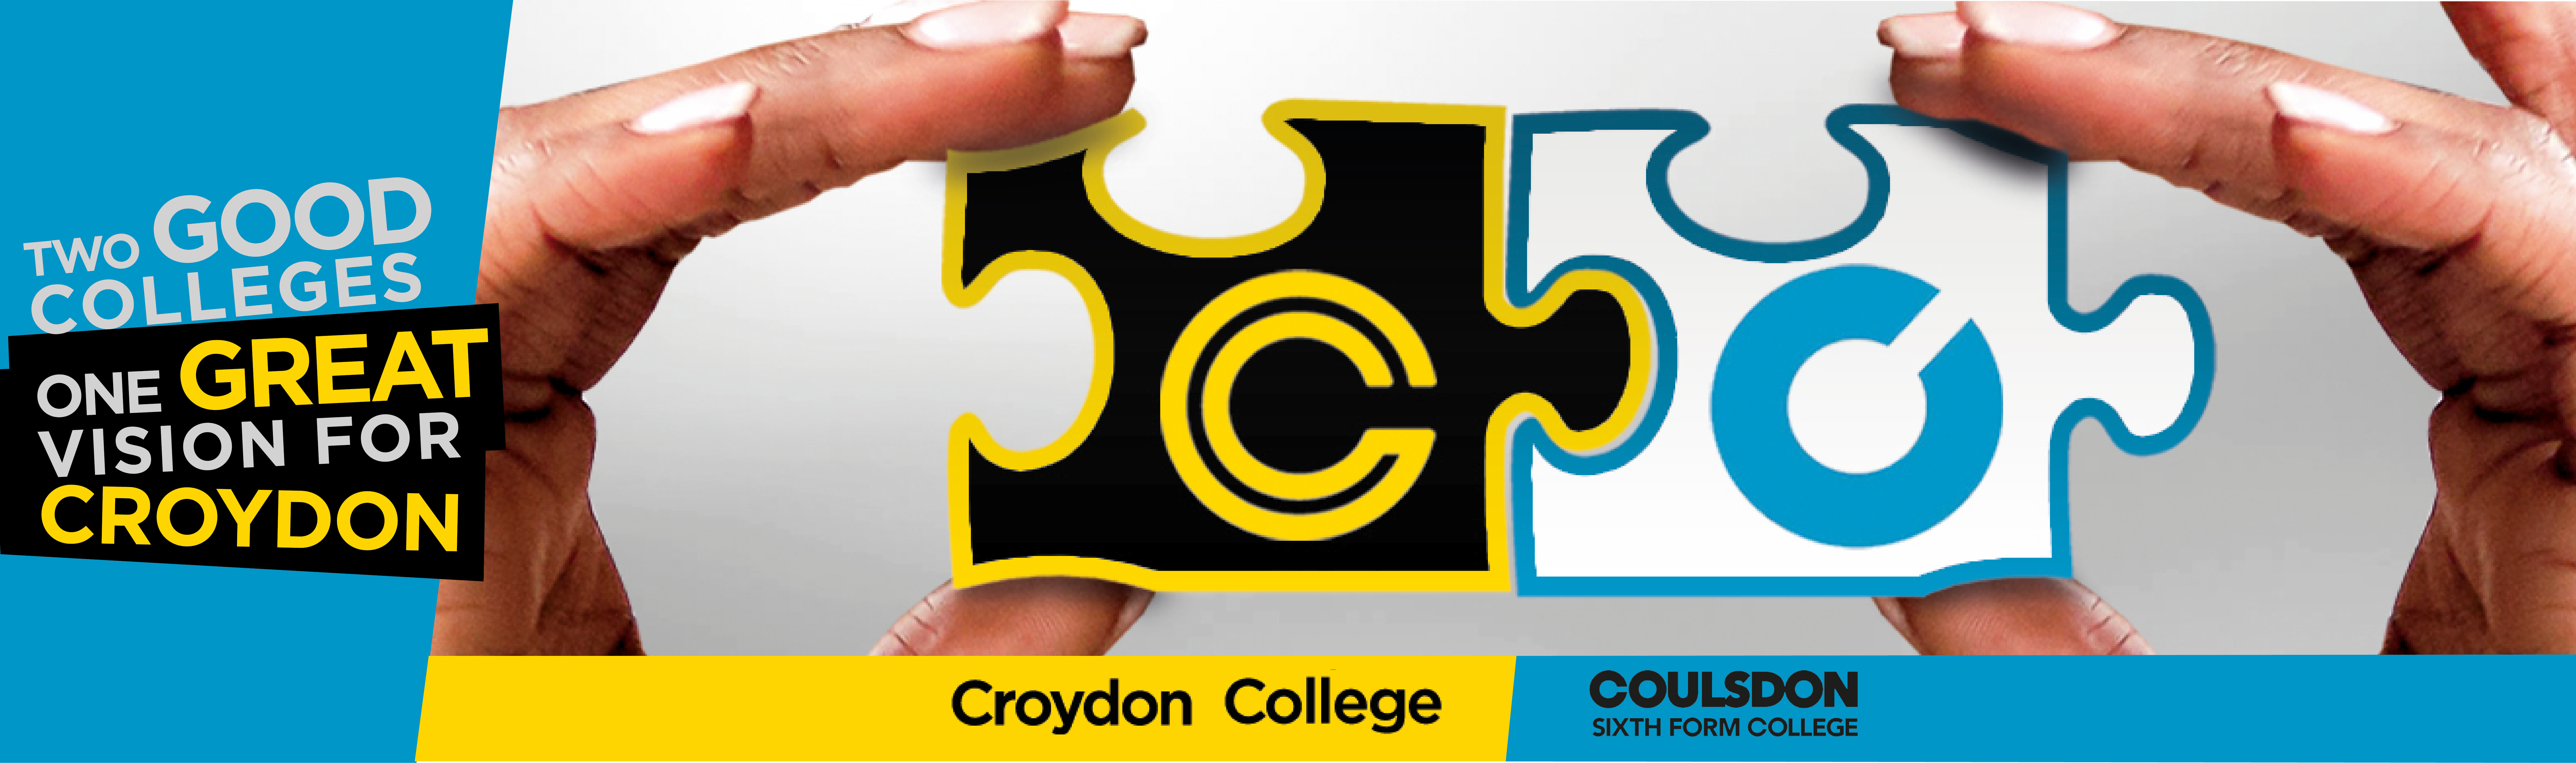 Two Good Colleges One Great Vision For Croydon